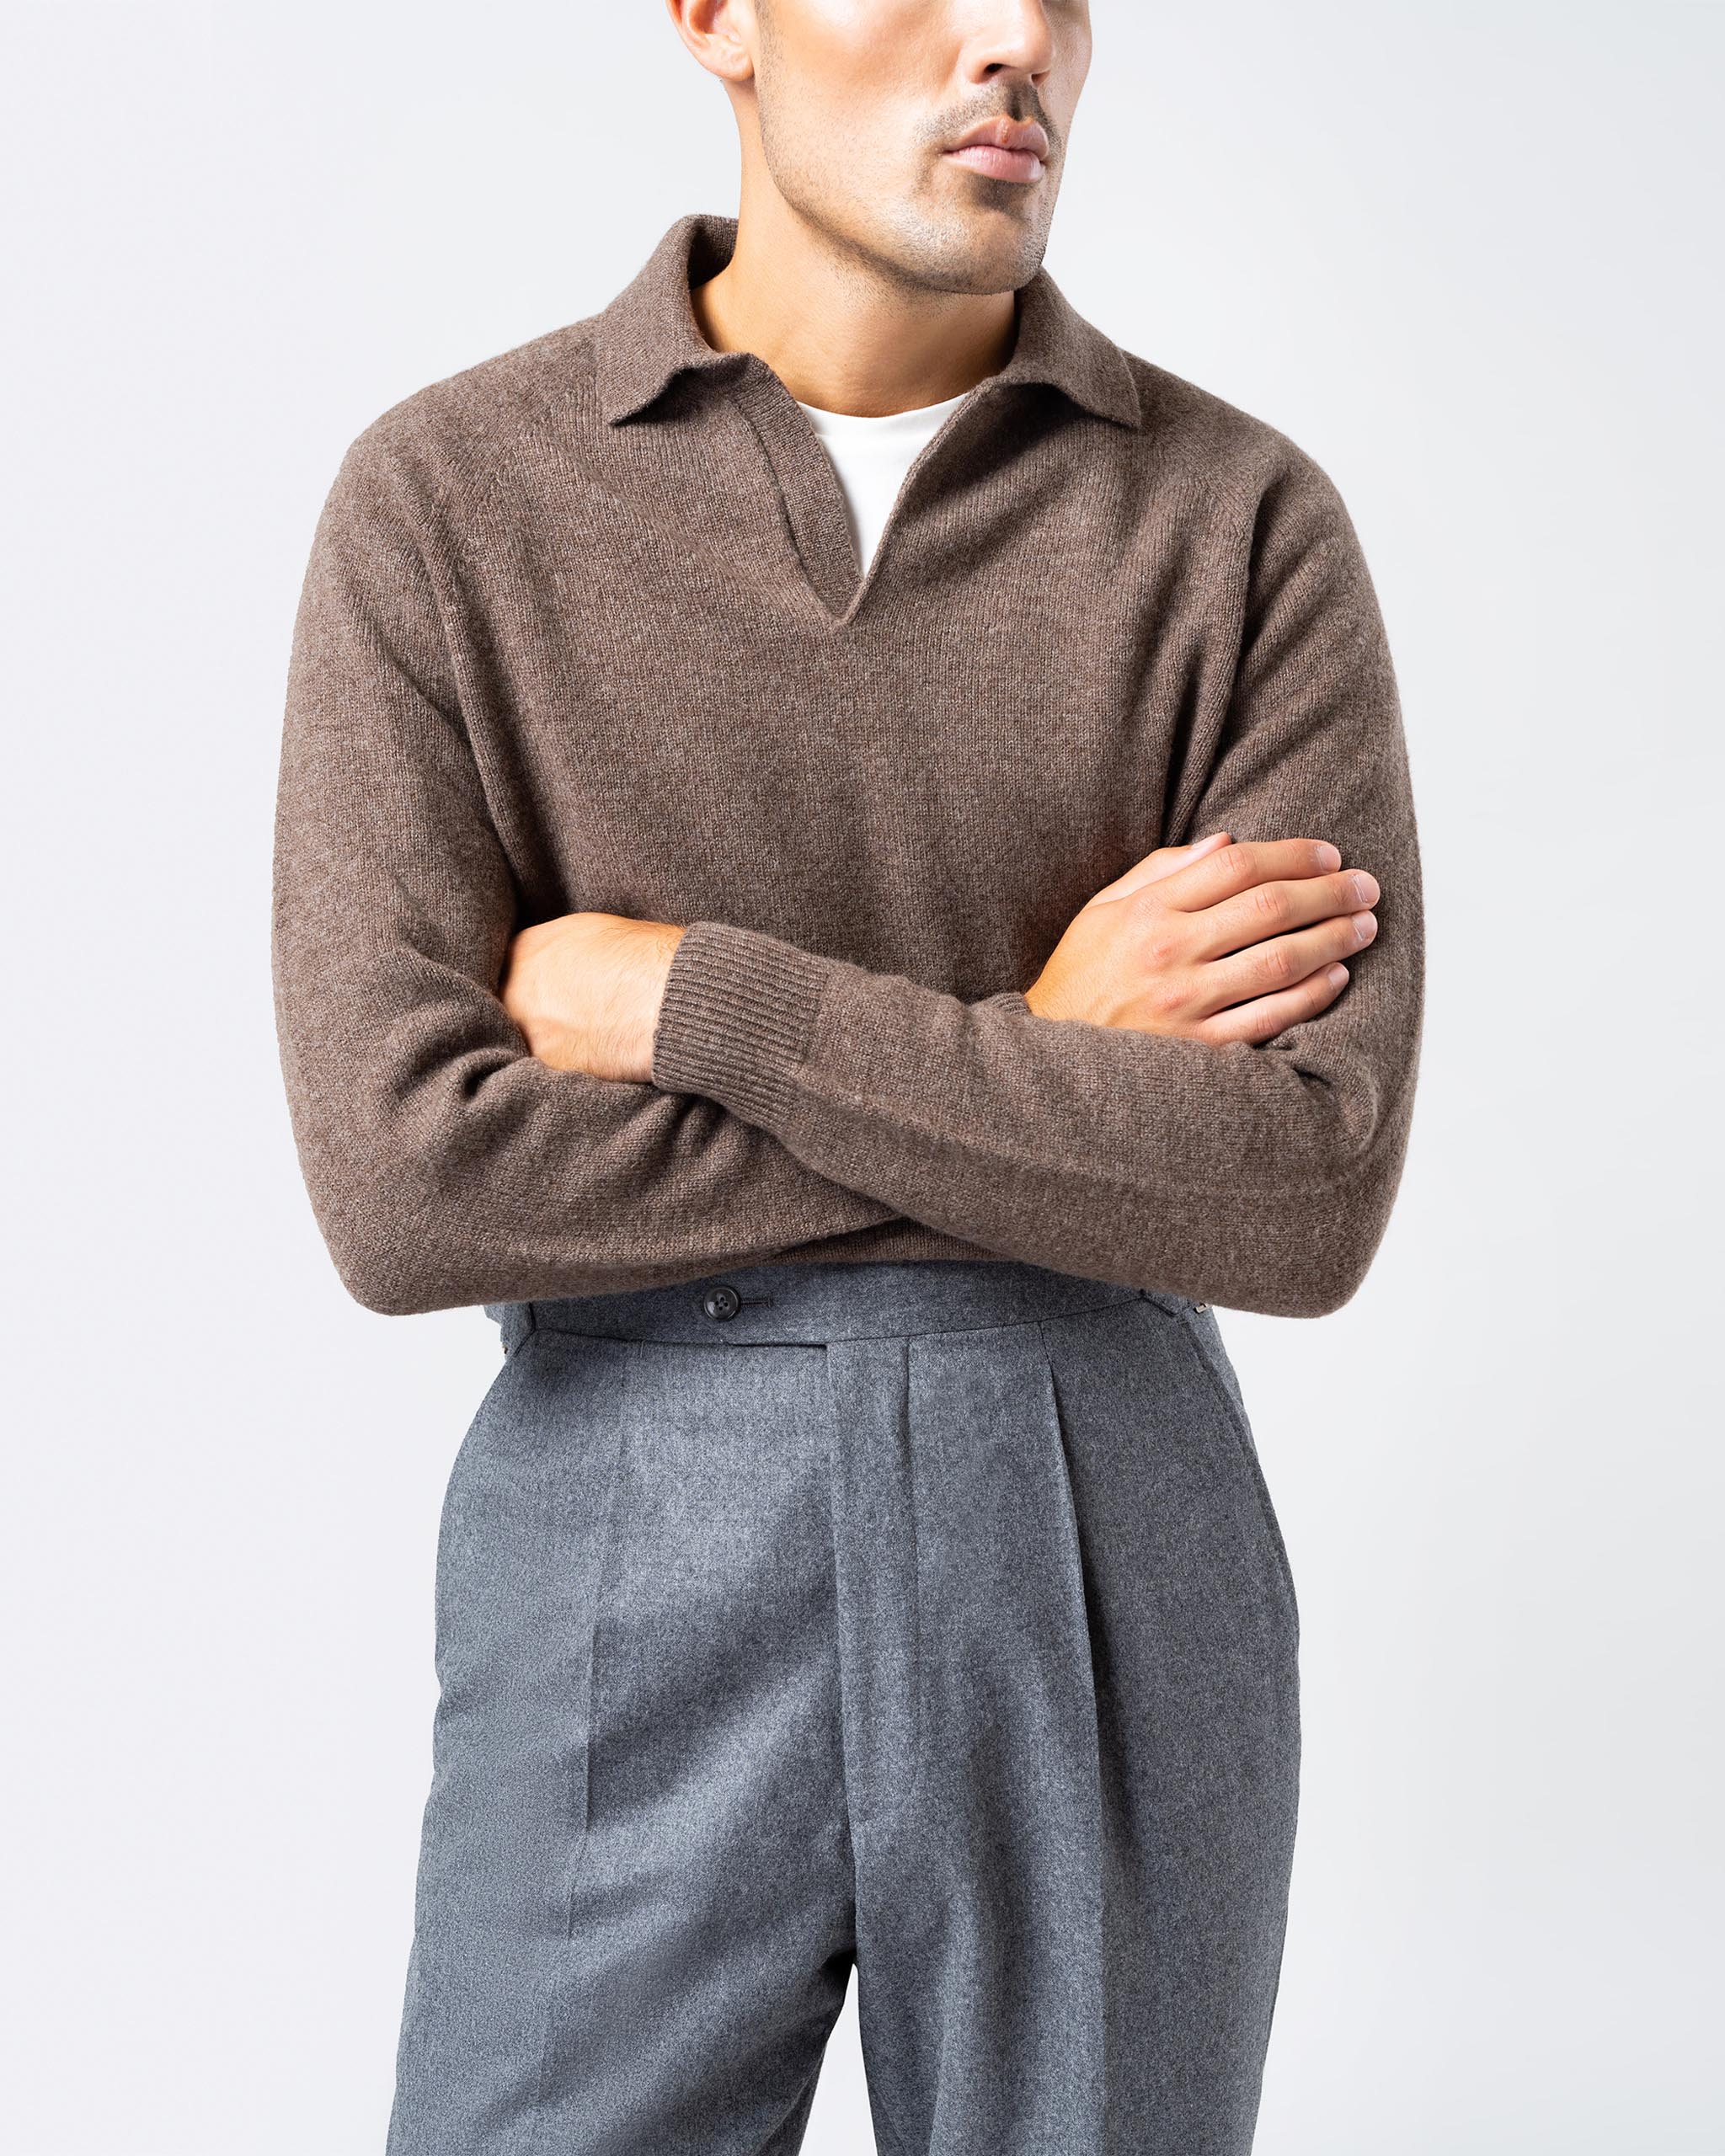 Wool cashmere polo brown image 1